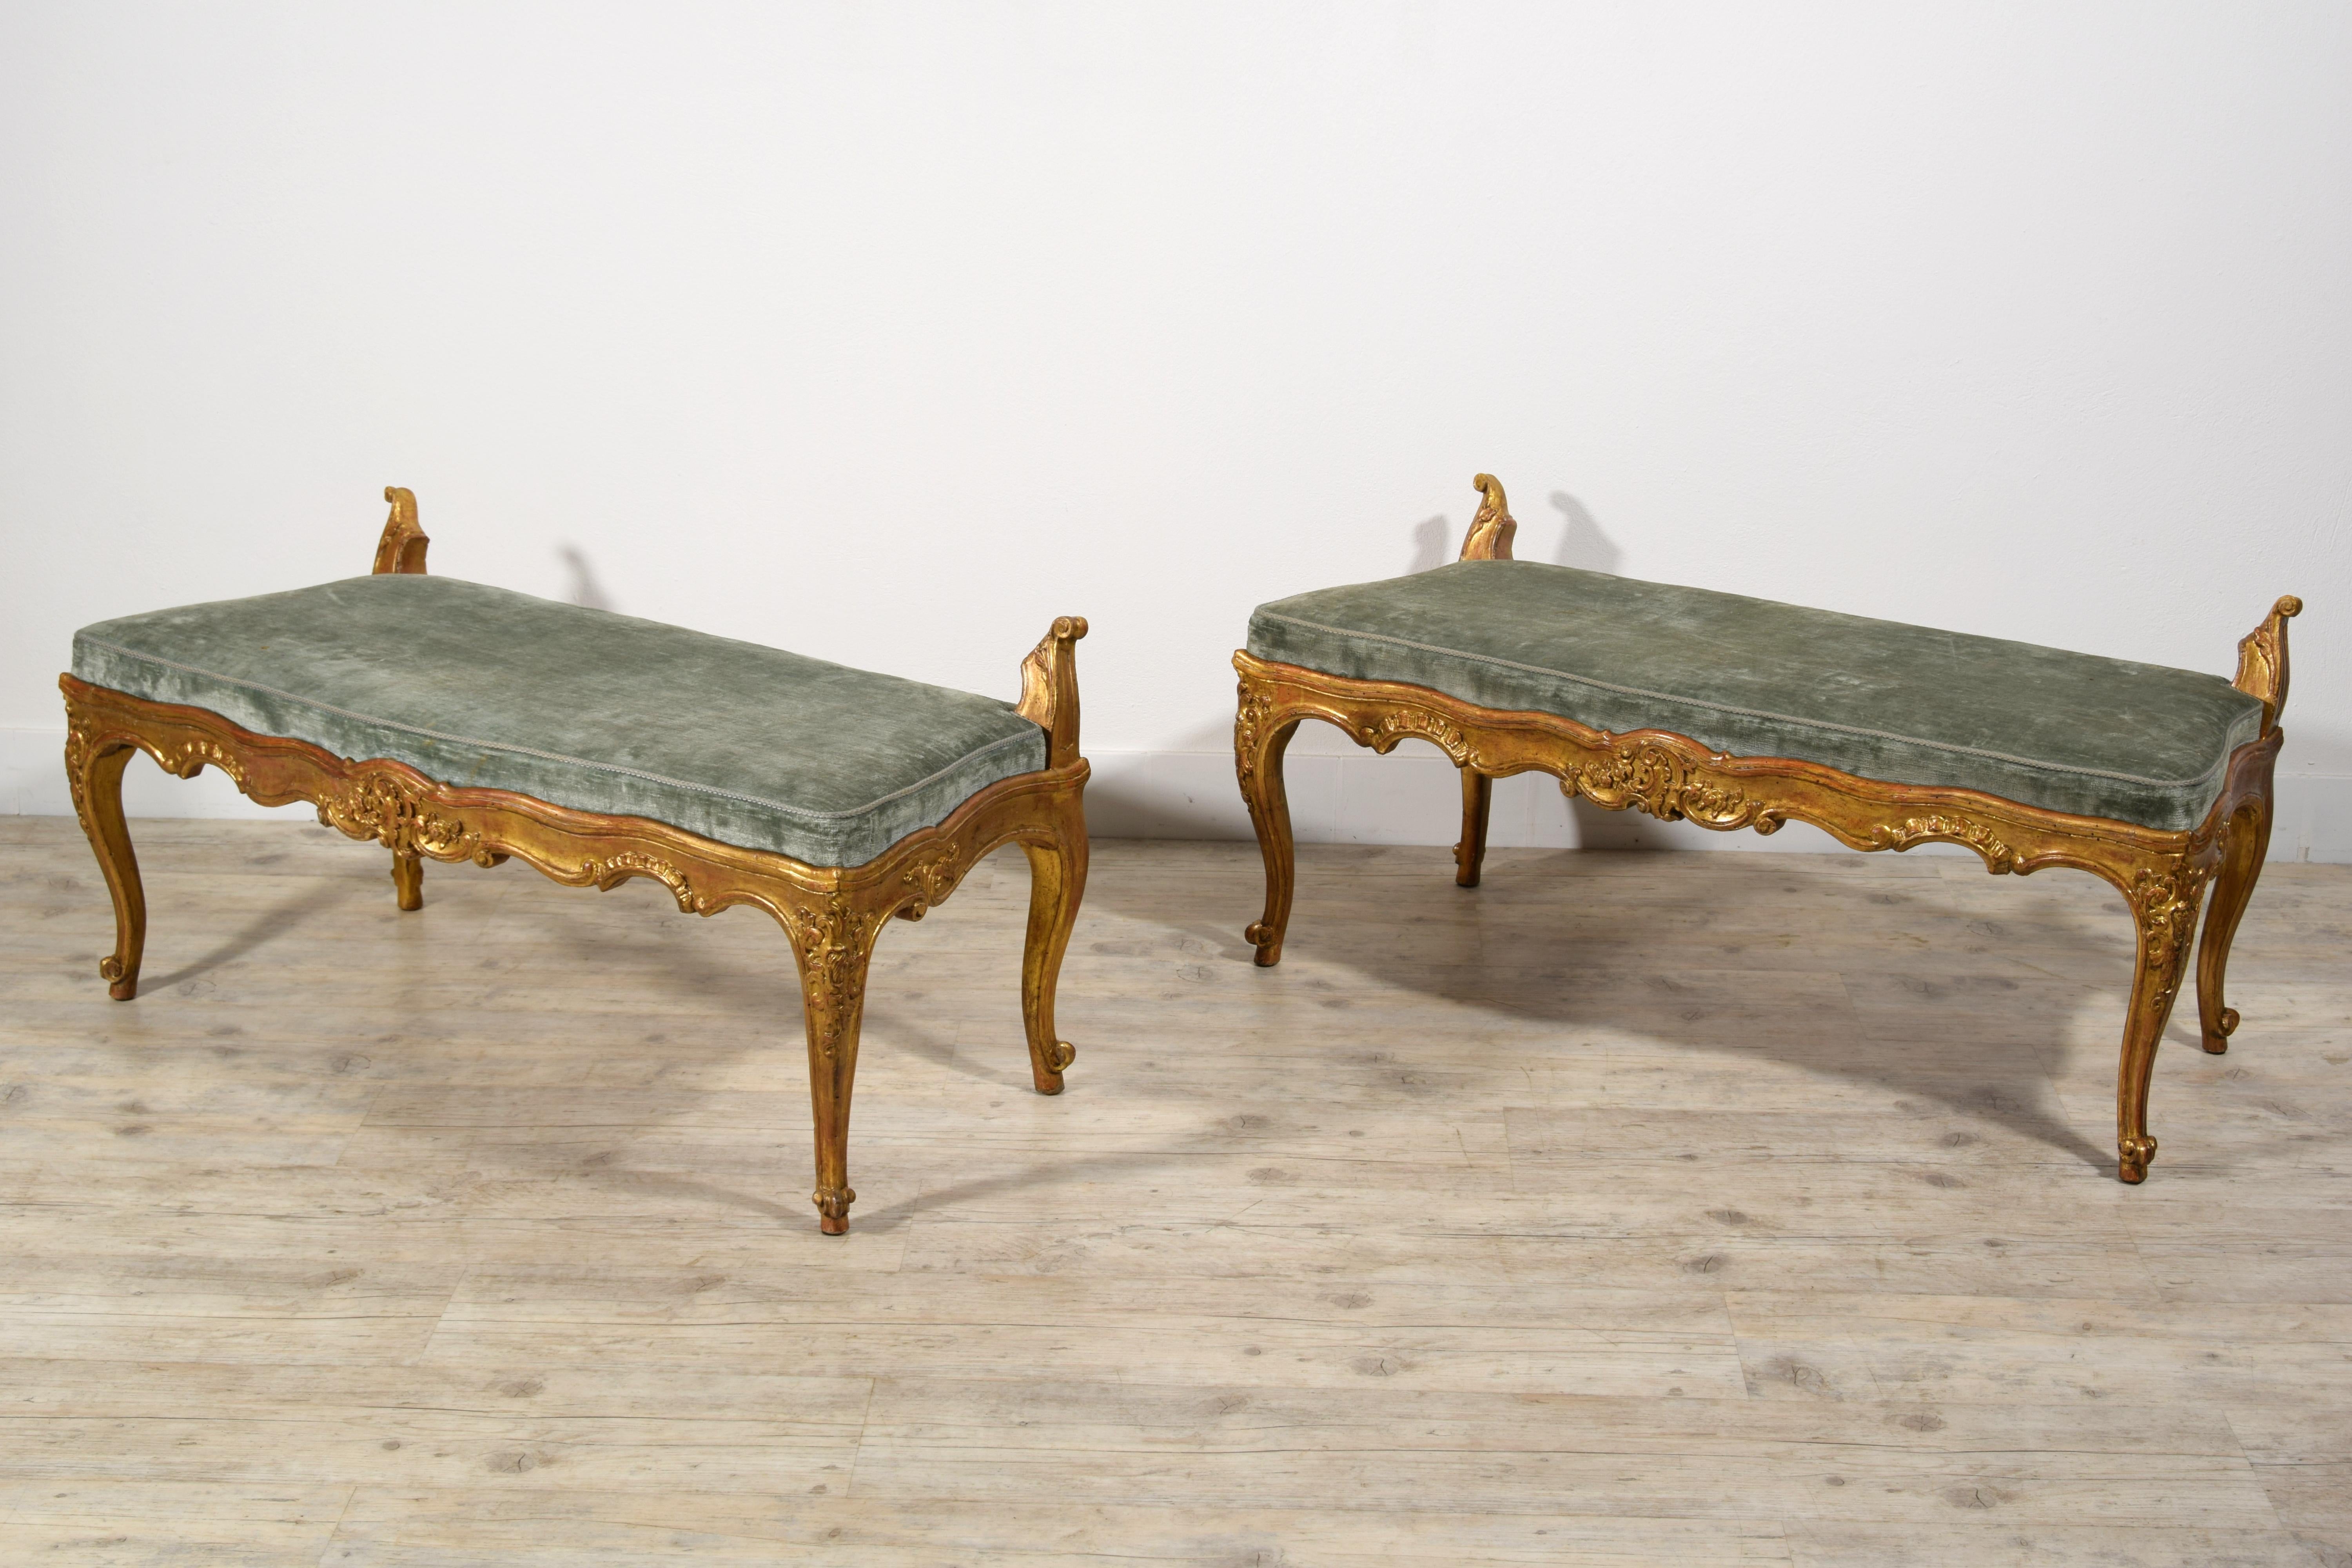 18th Century, pair of Italian Rococo carved giltwood benches.

This elegant pair of two-seater benches was built in the second half of the 18th century in Rome, Italy. The structure, in richly carved and gilded wood, has the characteristics of the